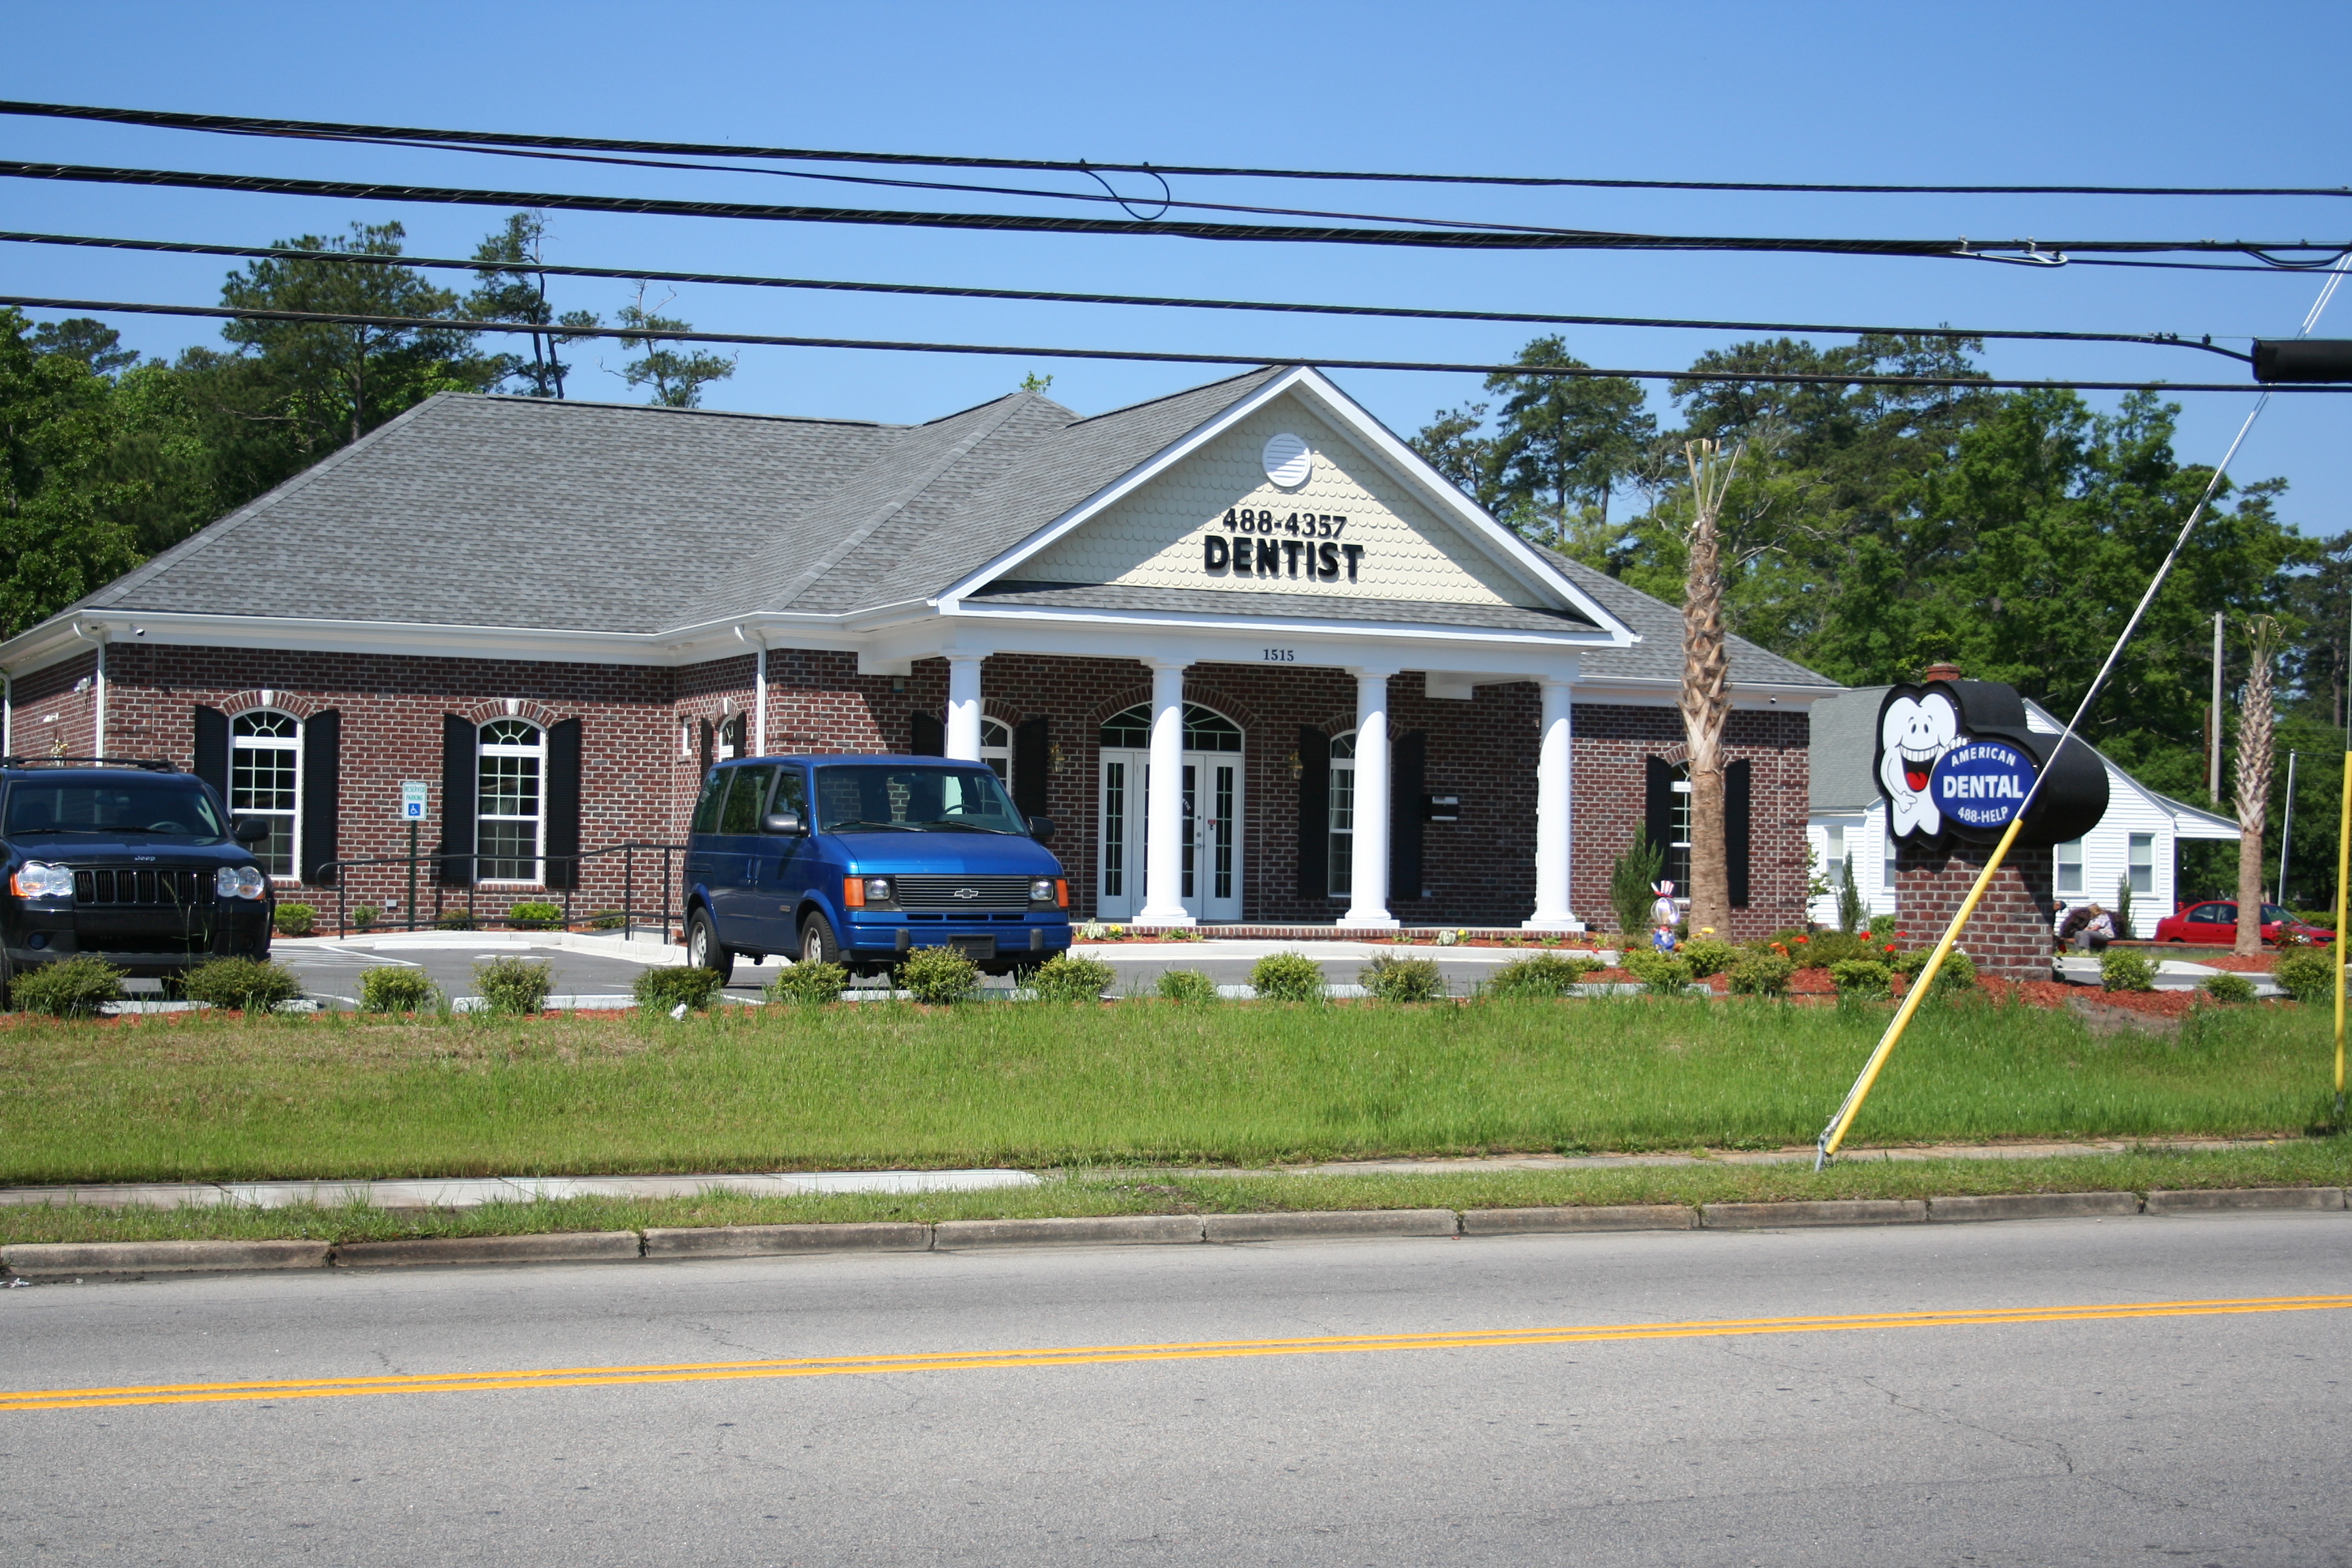 American Dental Care 1515 Main St, Conway, SC 29526 - YP.com